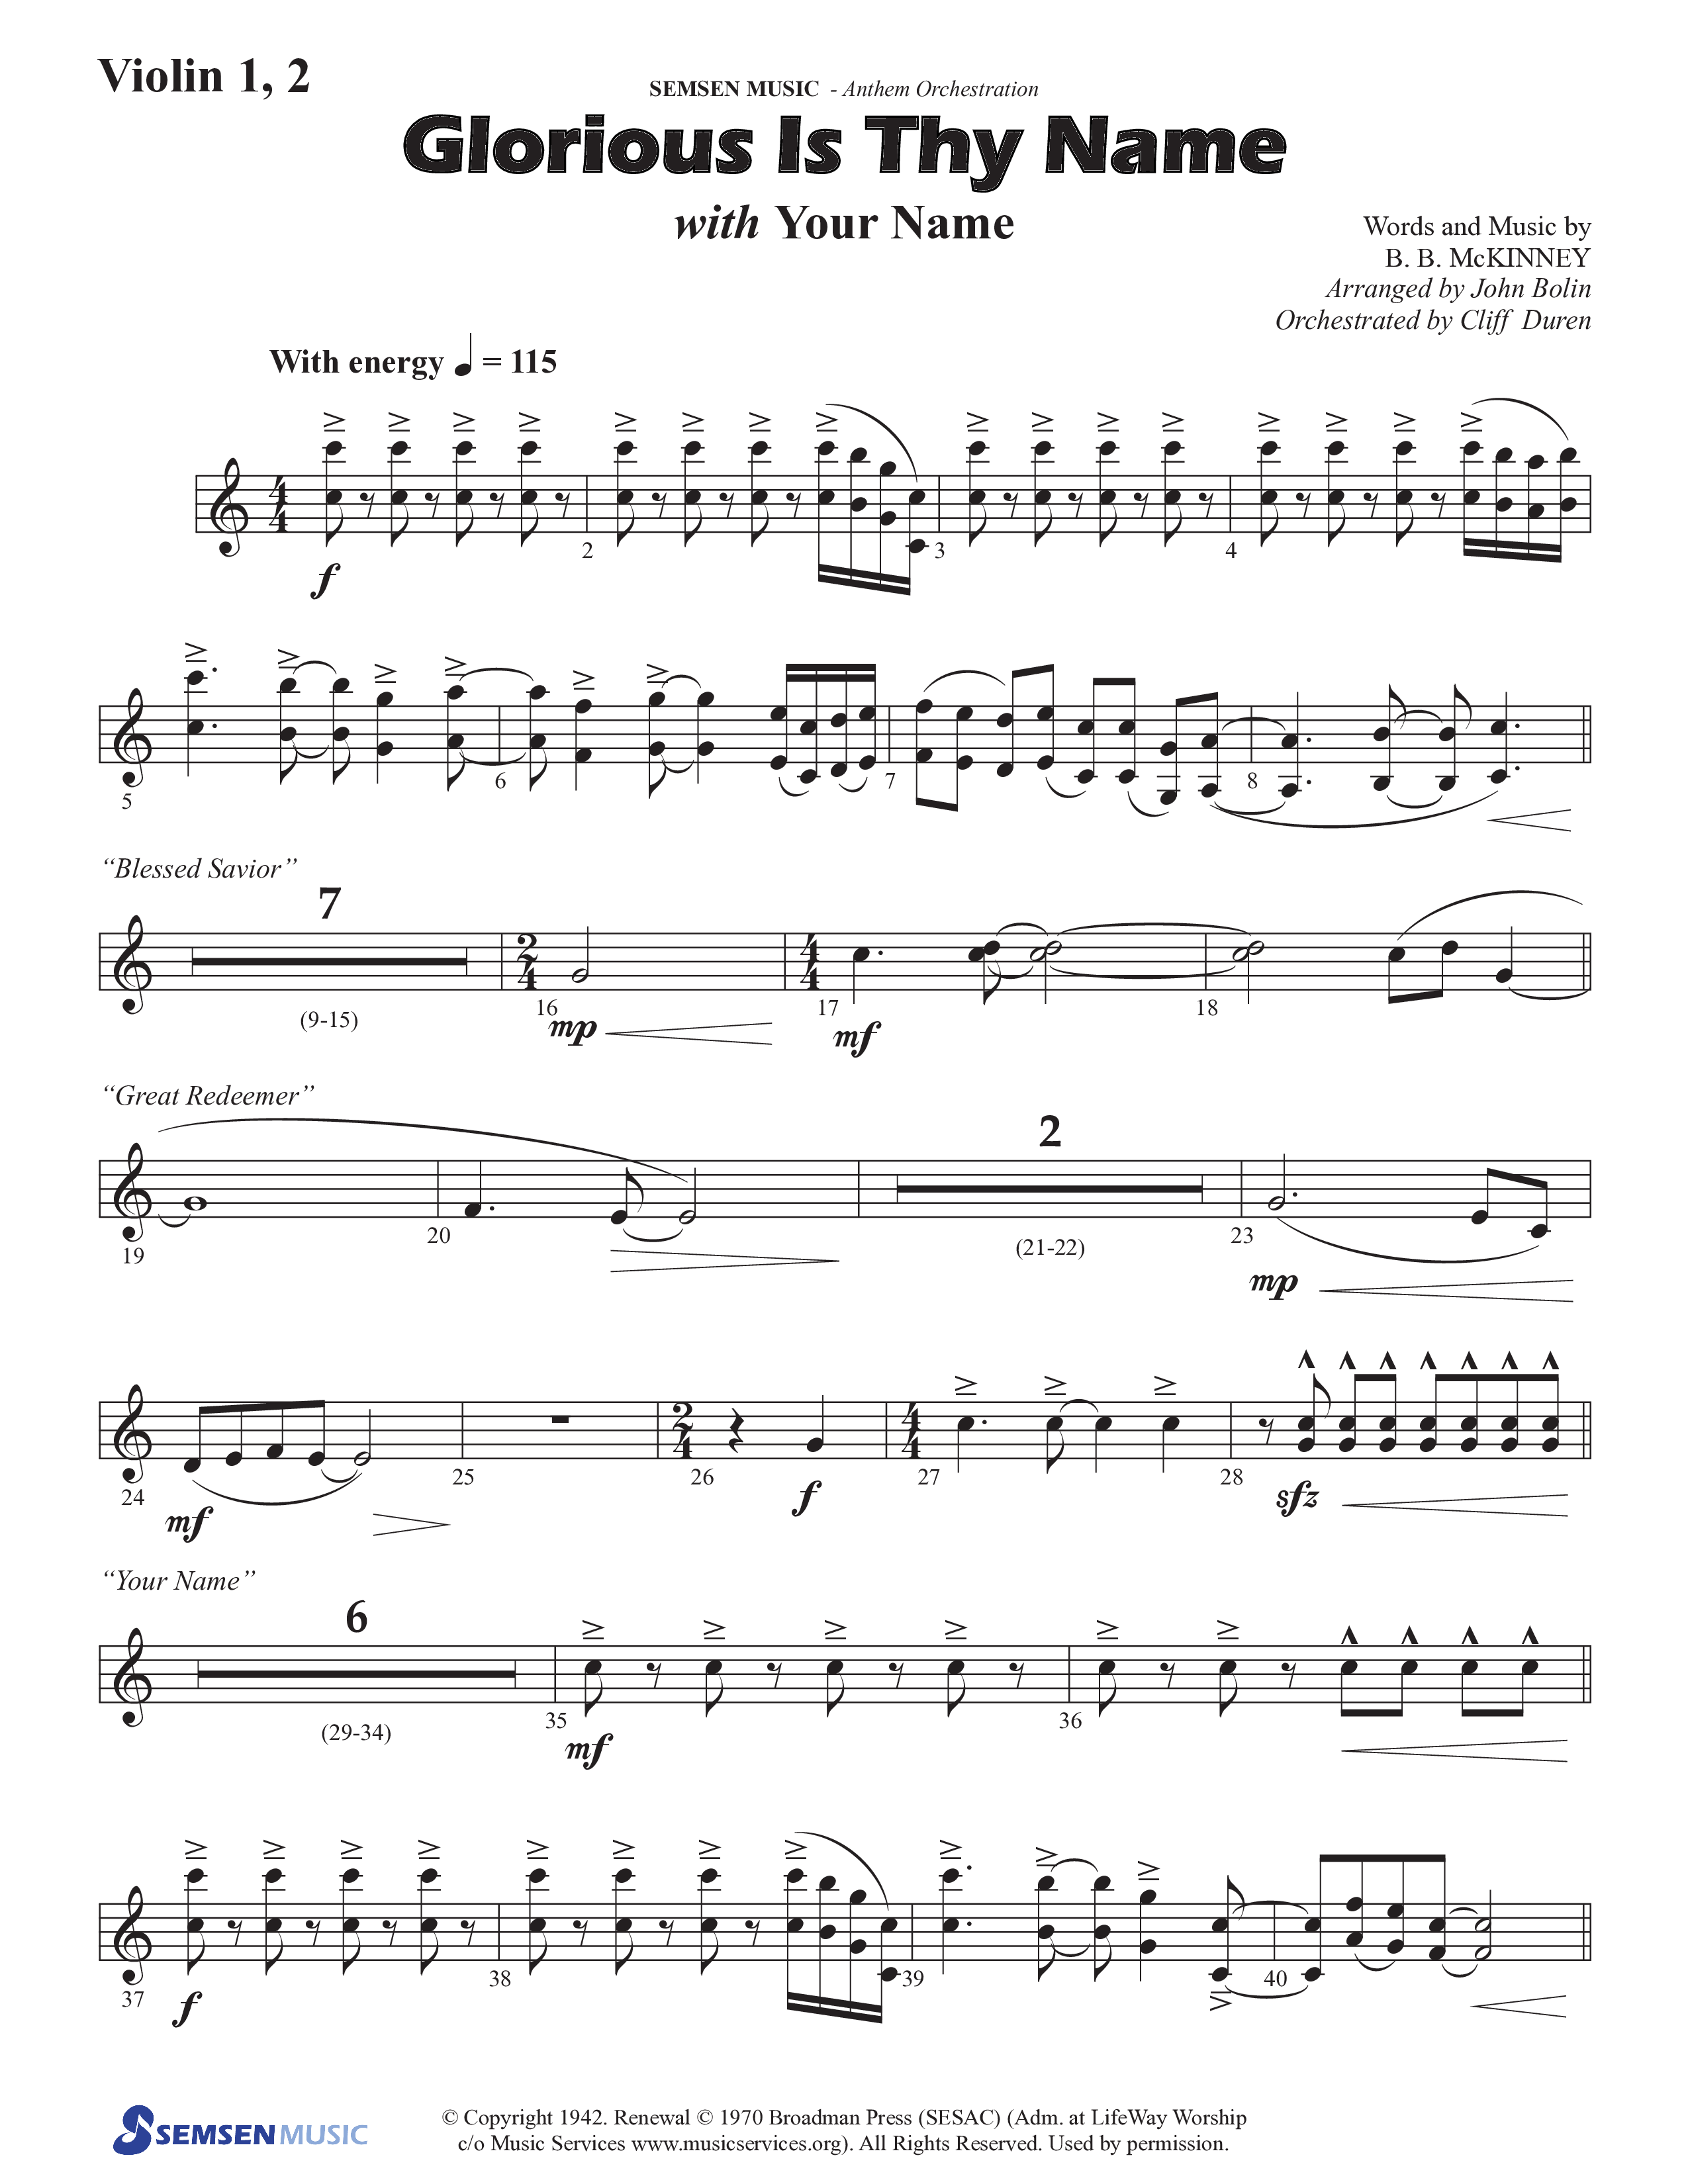 Glorious Is Thy Name (with Your Name) (Choral Anthem SATB) Violin 1/2 (Semsen Music / Arr. John Bolin / Orch. Cliff Duren)